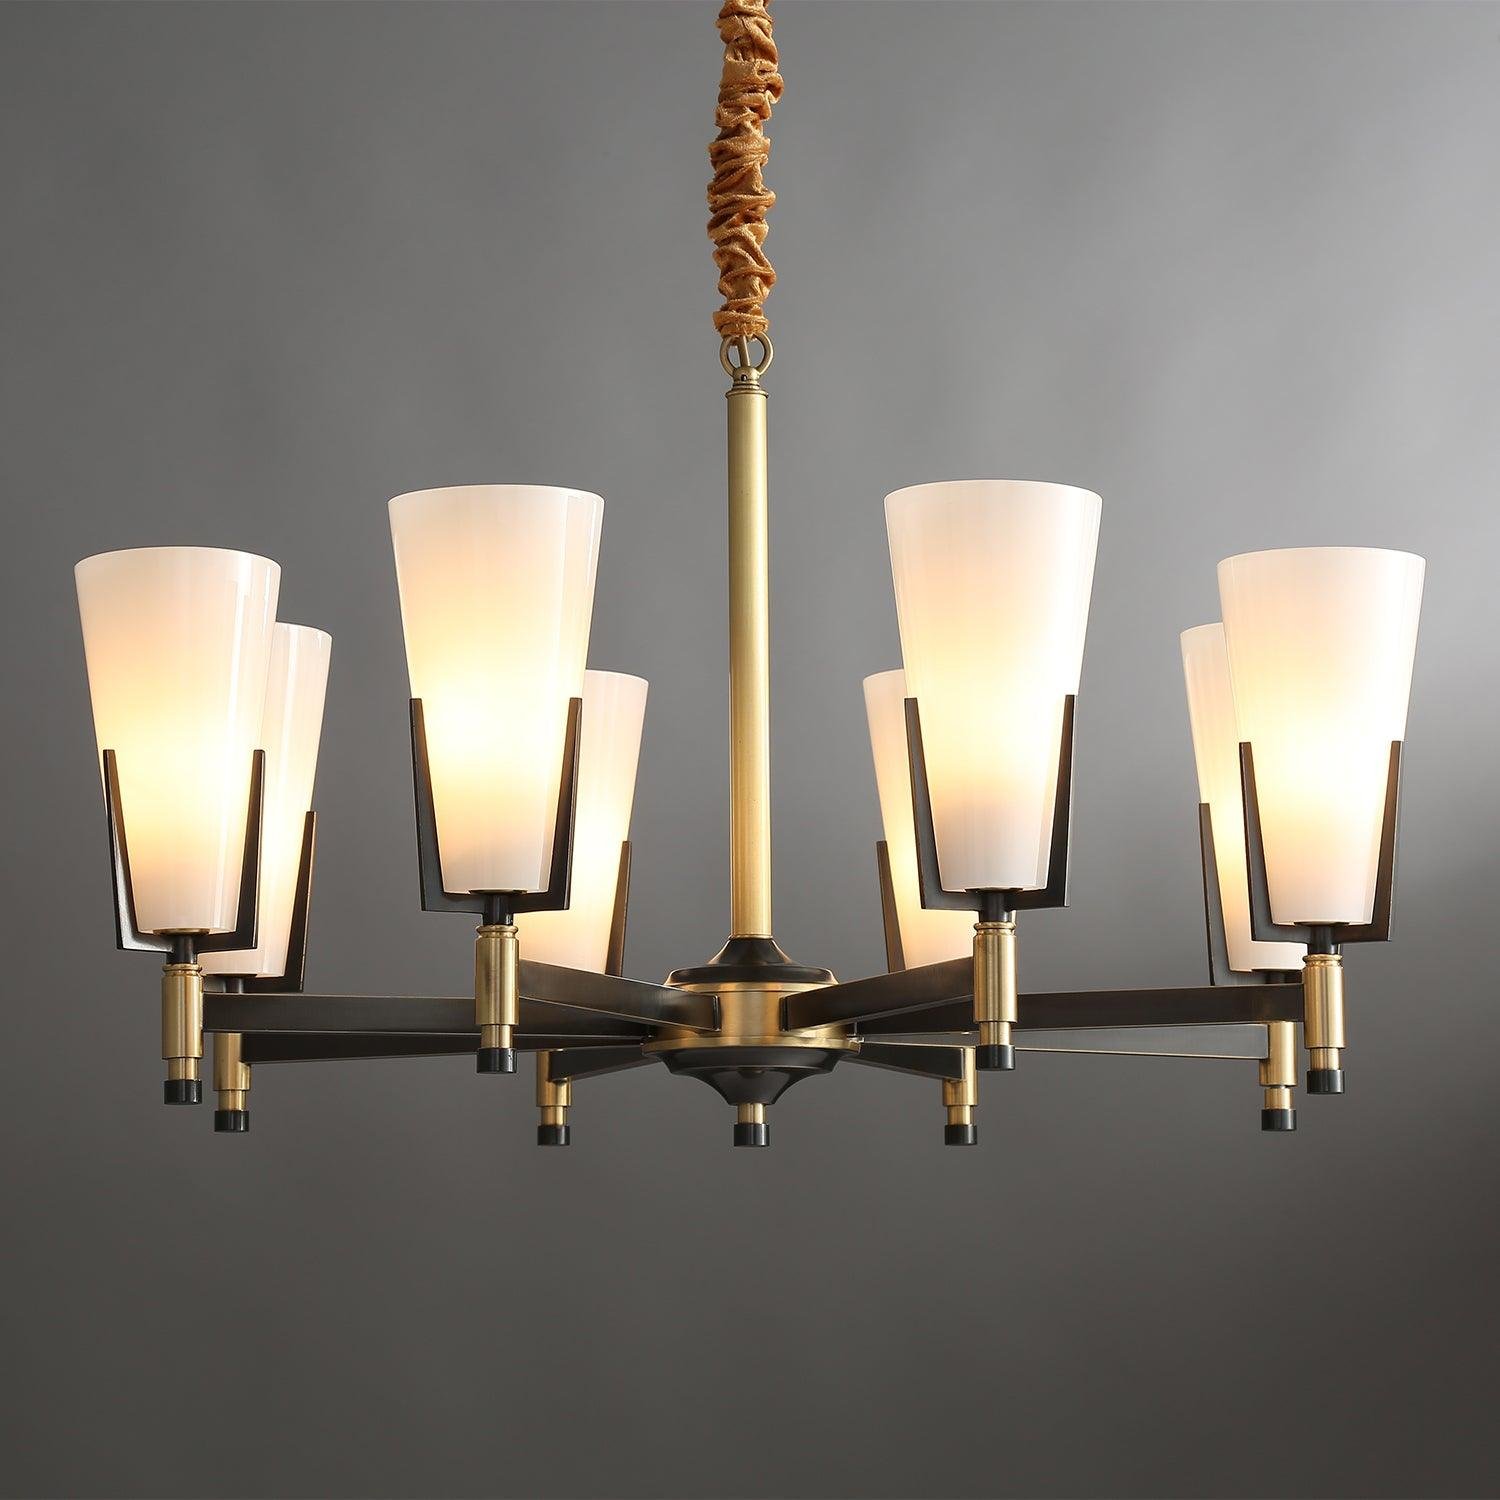 Black and White Upton Chandelier with 8 Heads - Diameter 30.7 inches x Height 18.9 inches (78cm x 48cm)